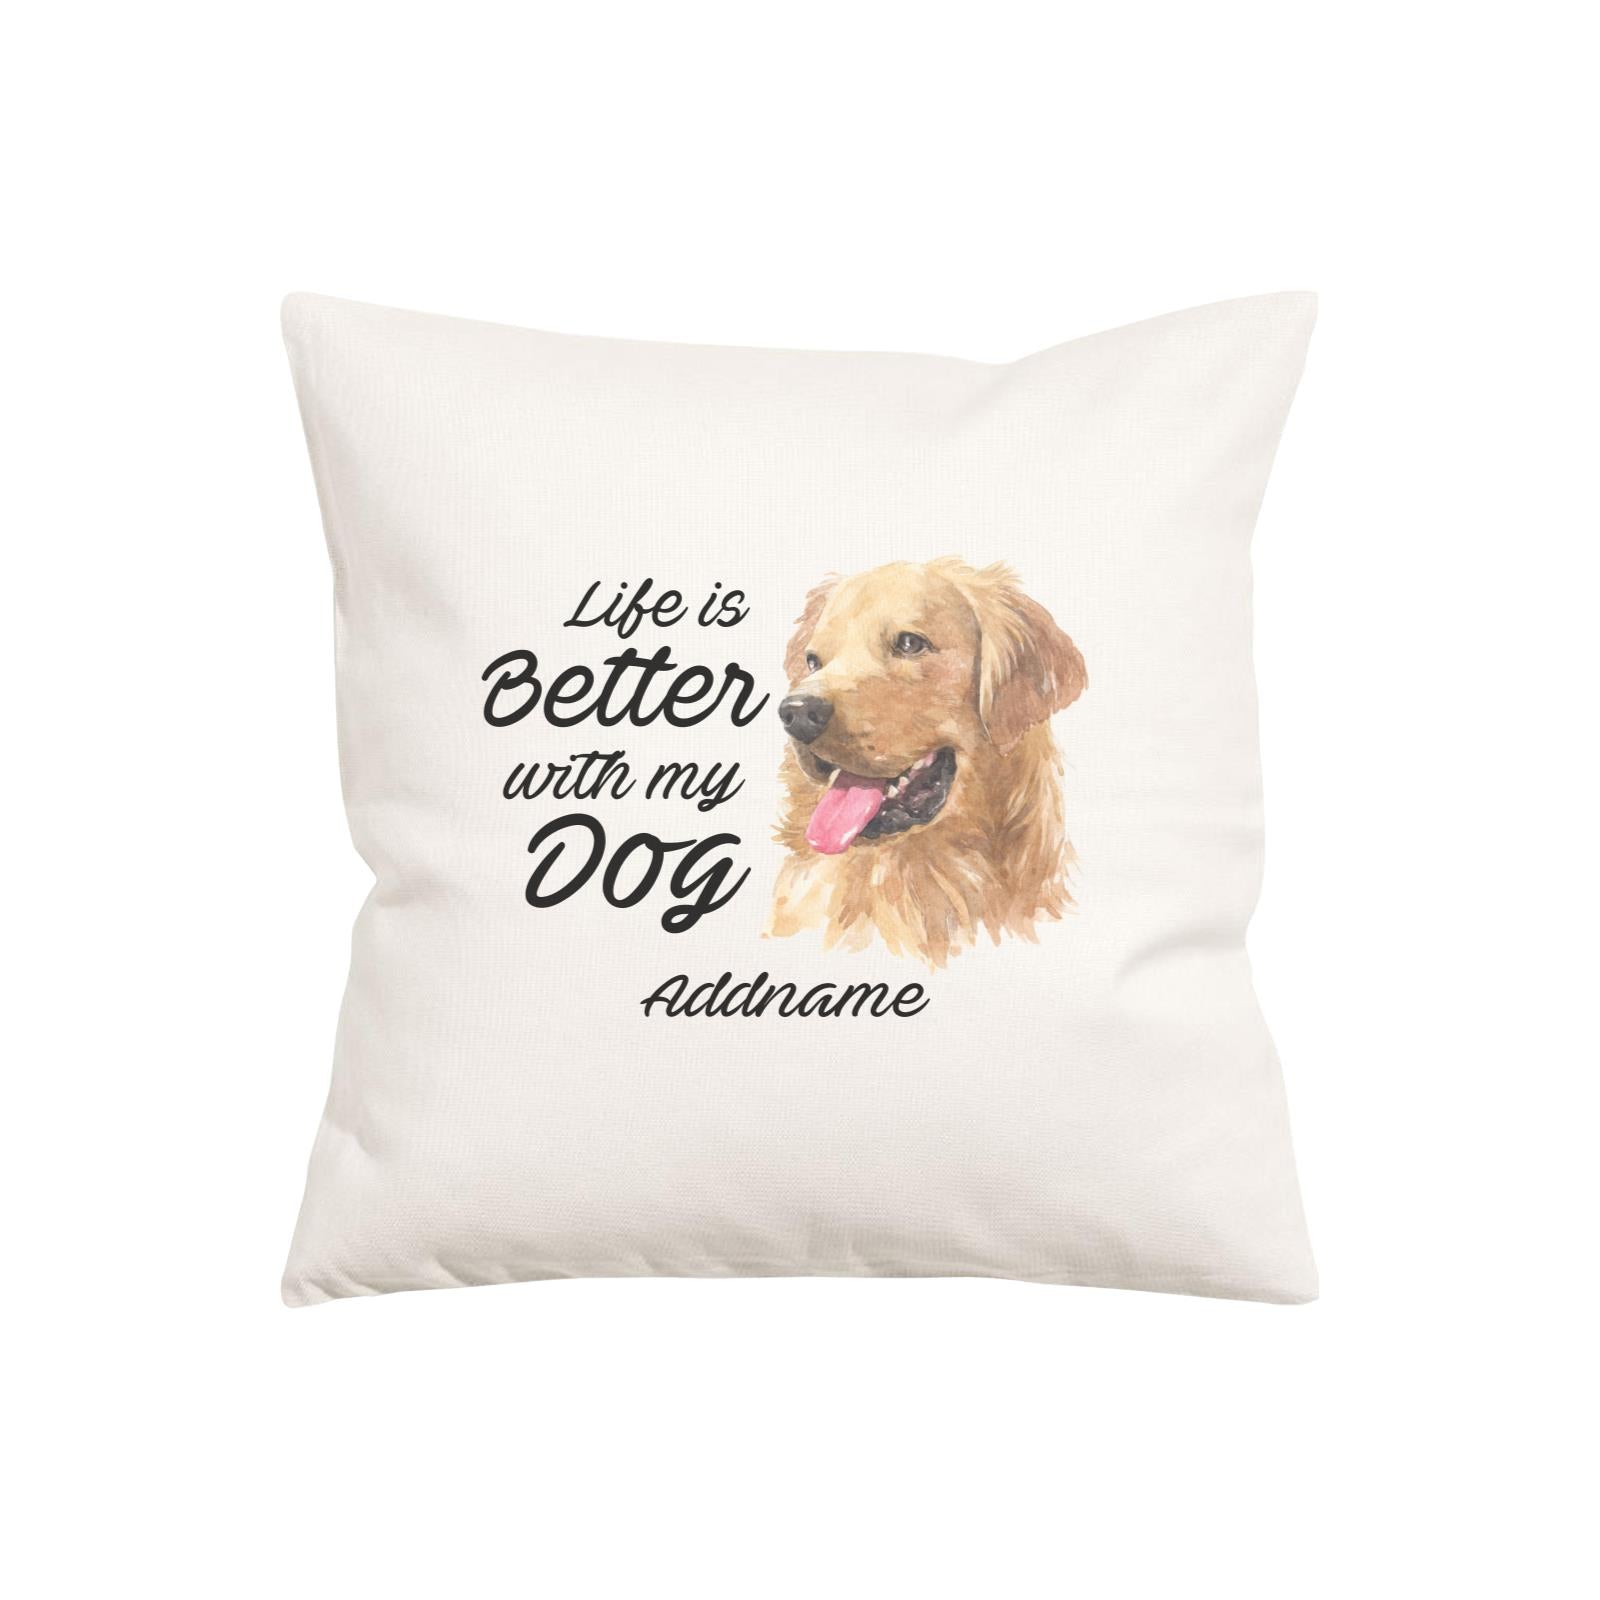 Watercolor Life is Better With My Dog Golden Retriever Left Addname Pillow Cushion